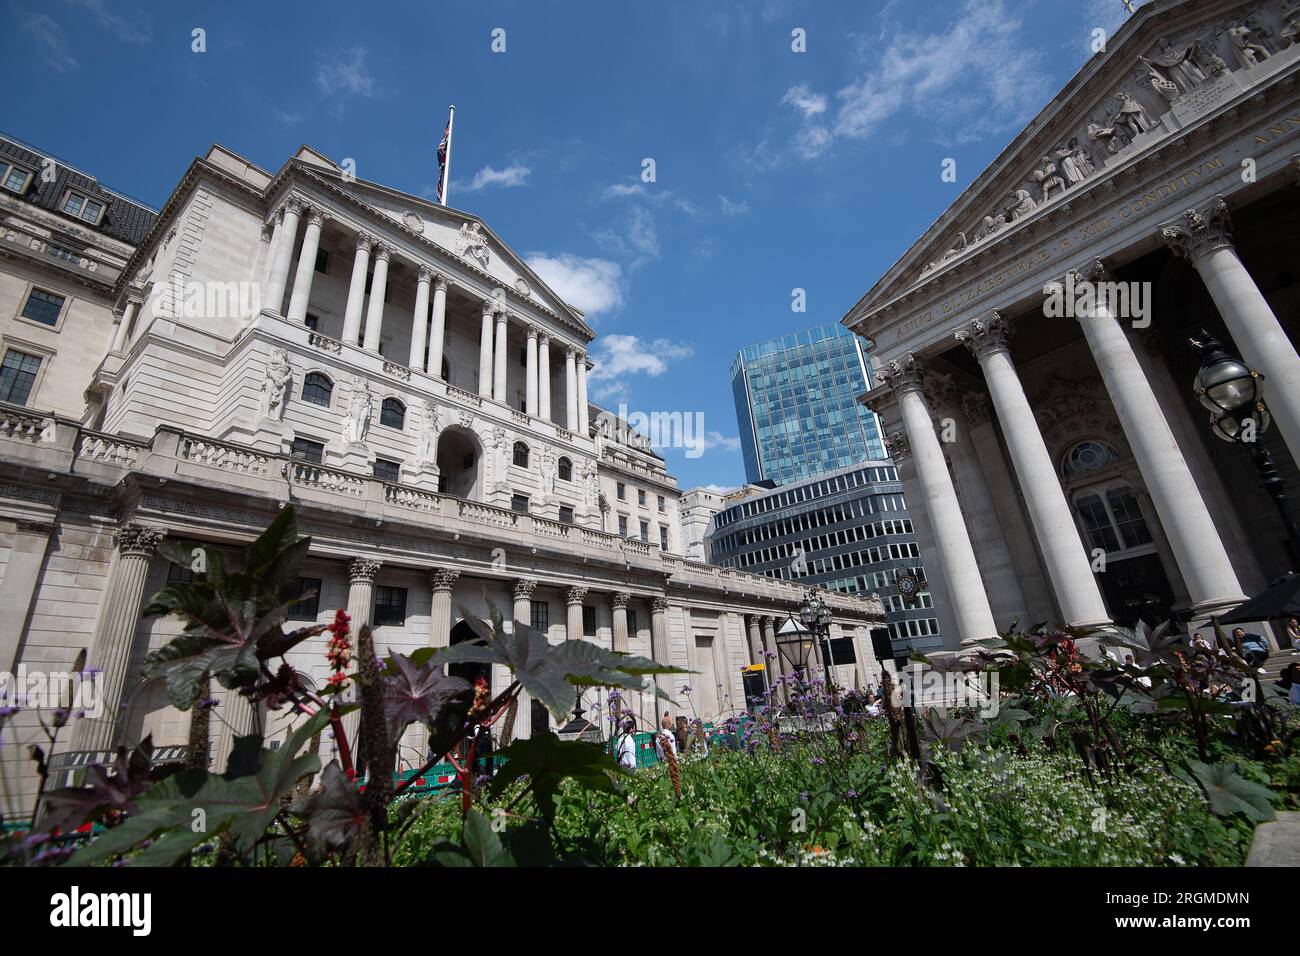 London, UK. 10th August, 2023. The Bank of England building in Threadneedle Street in the City of London. The Bank of England raised interest rates to 5.25% last week in an attempt to keep inflation down. Some home owners are now having to pay higher mortgage interest rates, however, Britain’s biggest mortgage lender, Halifax has announced that it will cut rates on fixed-rate mortage deals by 0.71 per cent from tomorrow, Friday 11th August. The Bank of England has warned businesses and households that the cost of borrowing will remain high for at least the next two years. Some economists are w Stock Photo